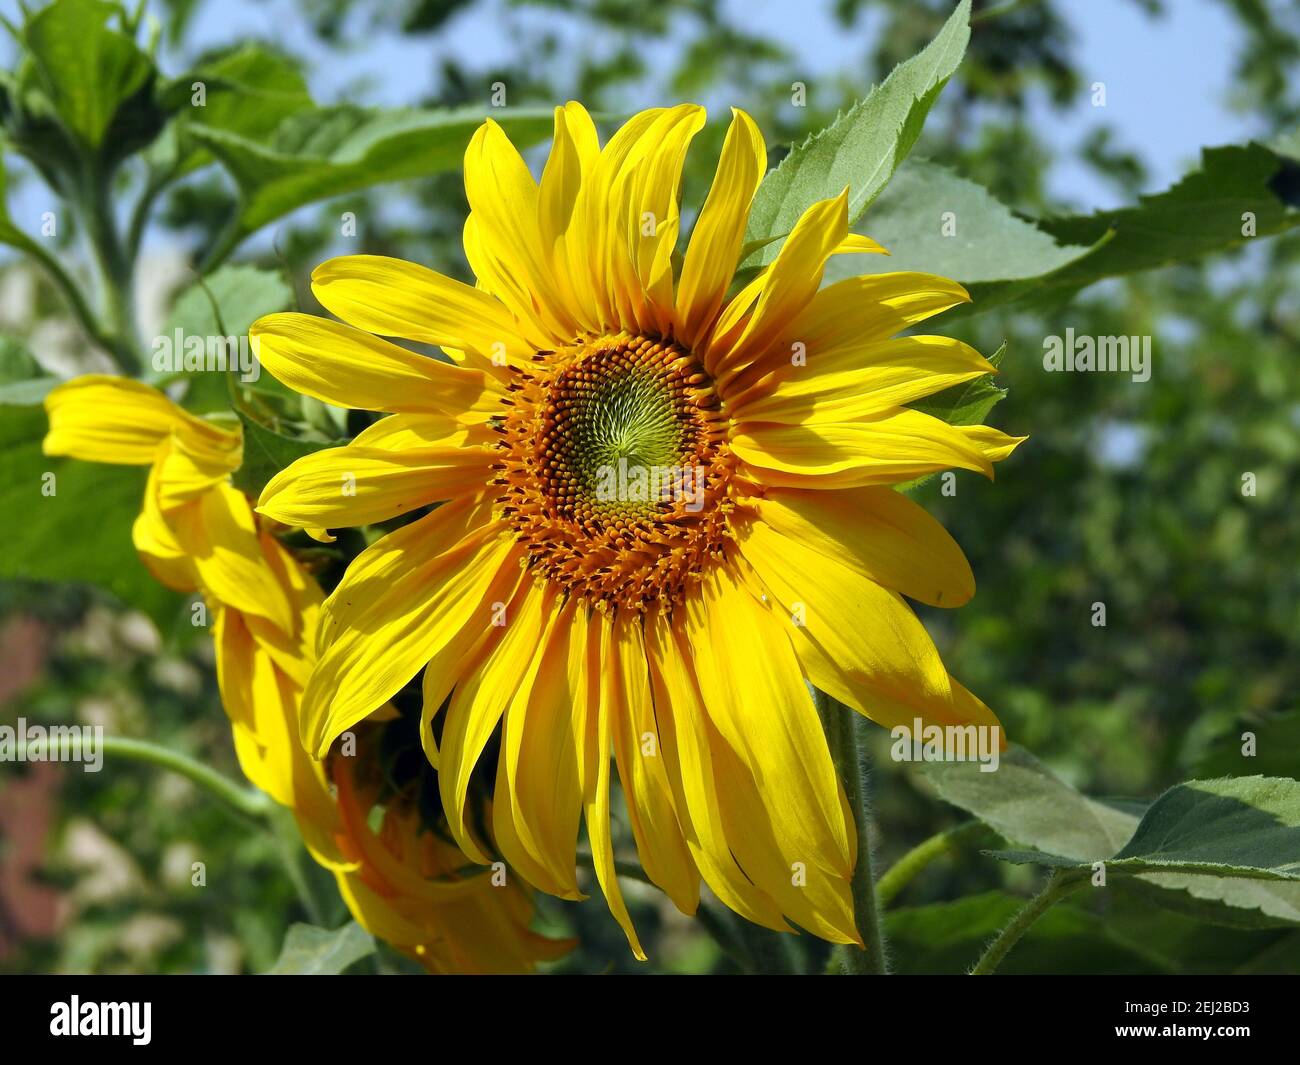 A close-up view for a growing common sunflower, Helianthus annuus Stock Photo